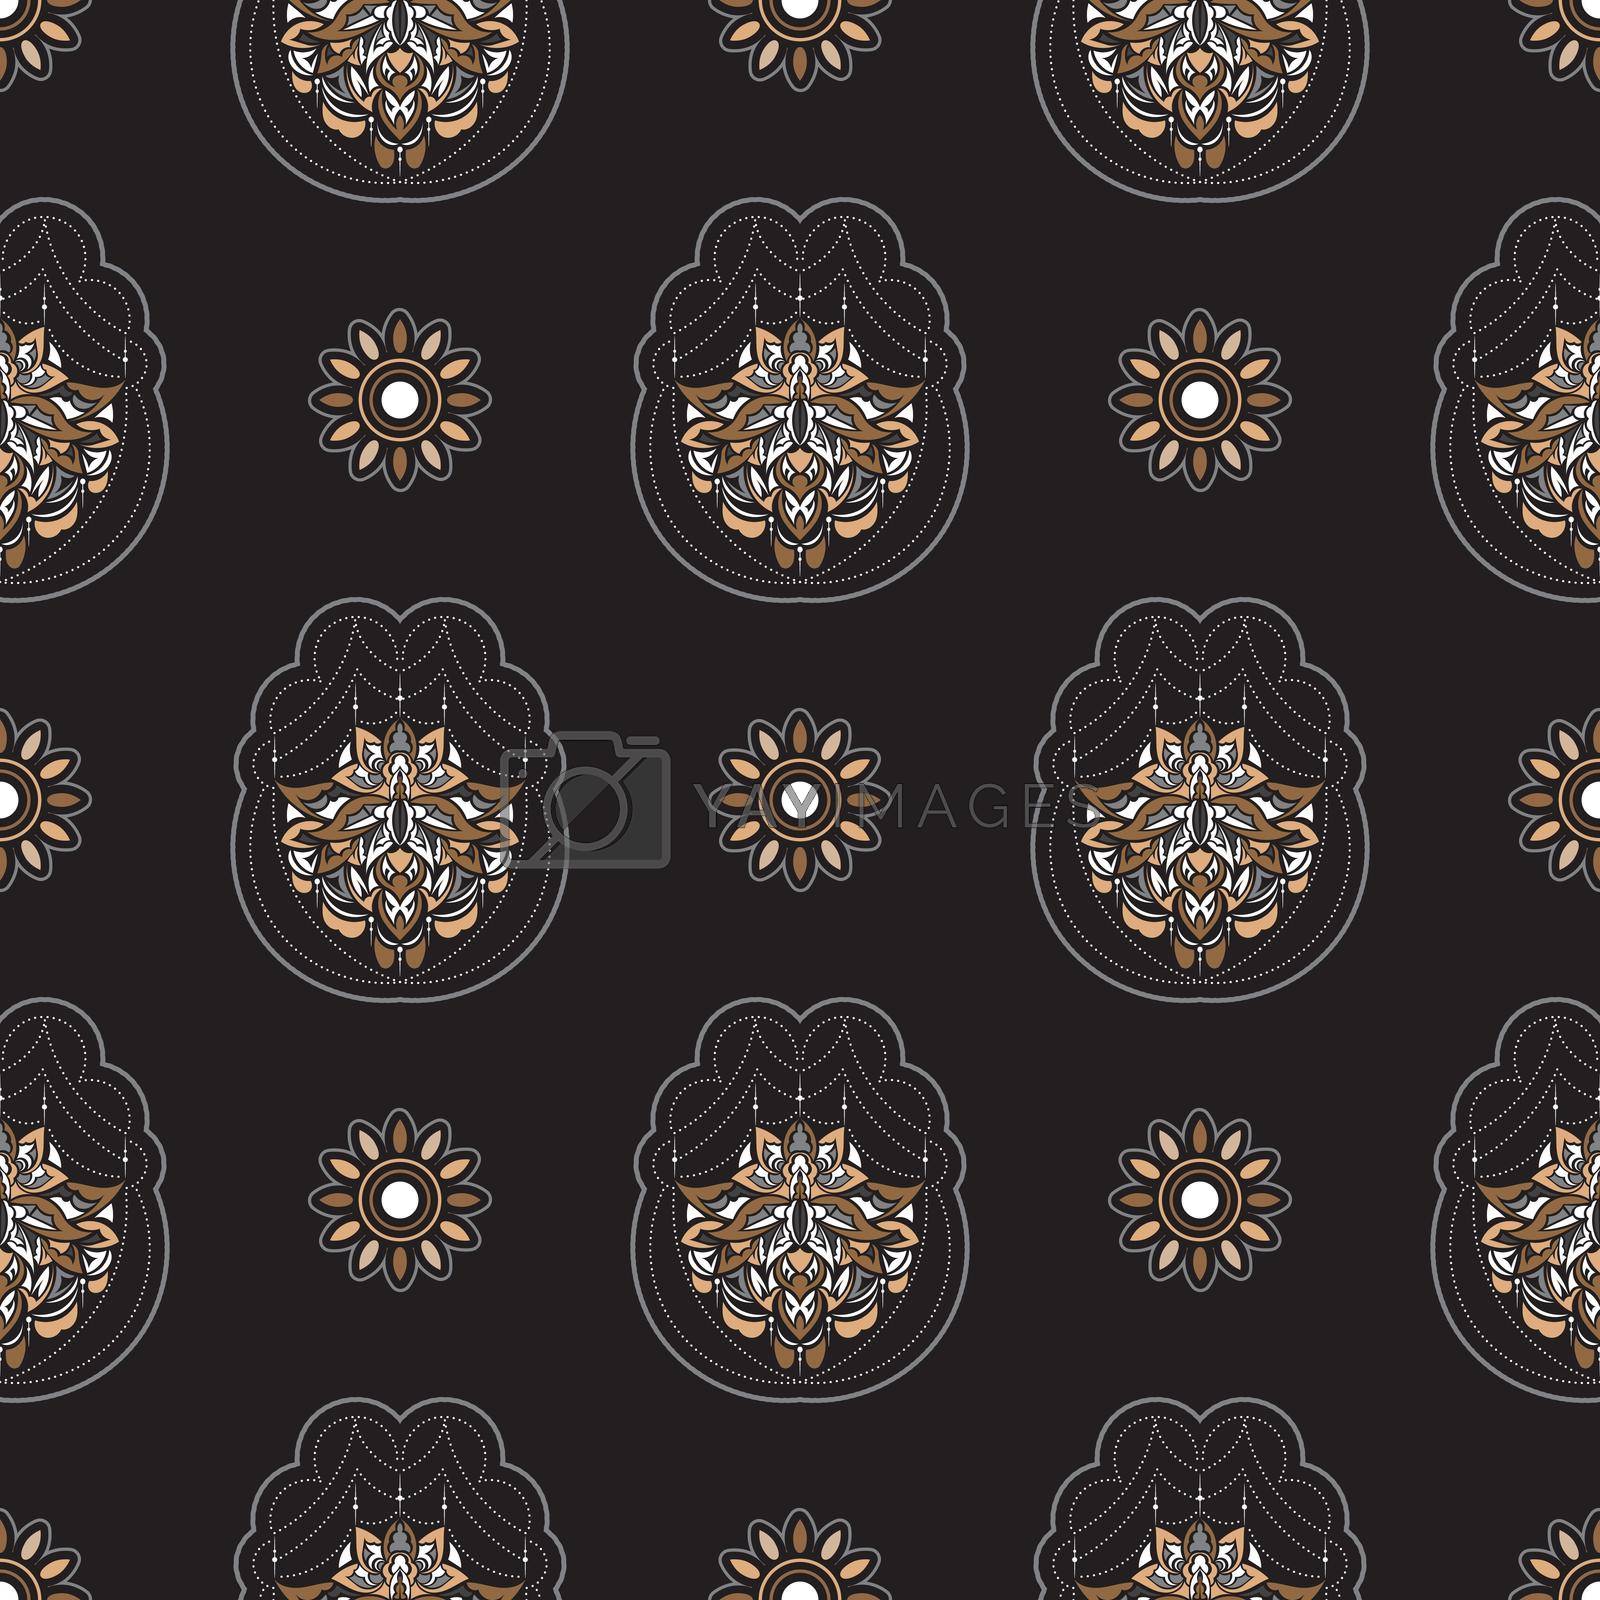 Dark lotus seamless pattern. Good for backgrounds and prints. Vector illustration.